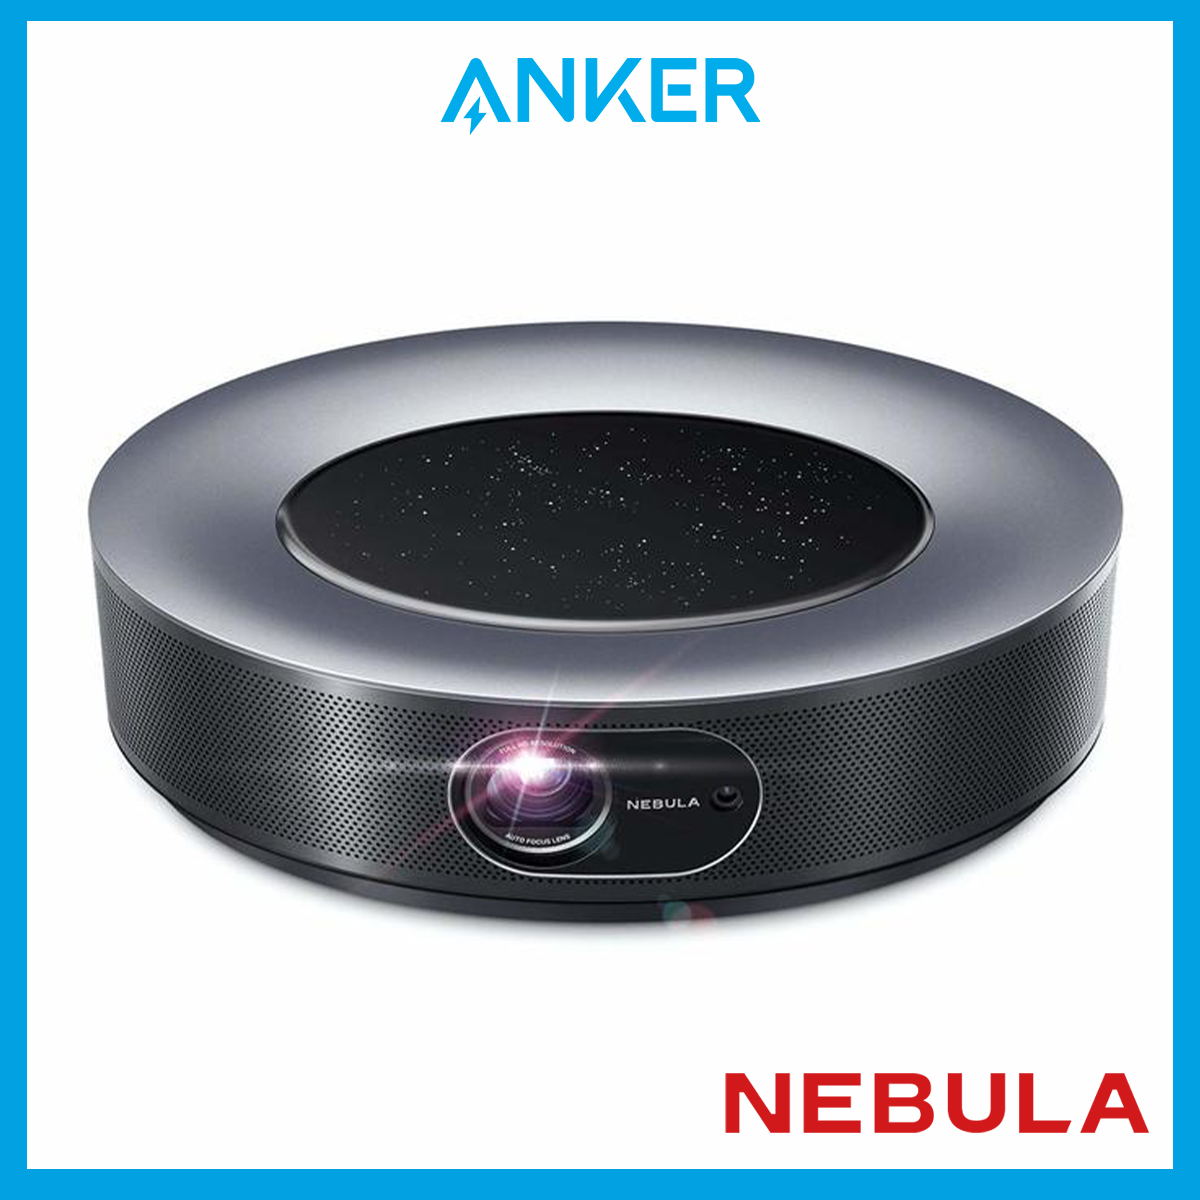 Anker Nebula Cosmos 1080p Home Entertainment Projector, 1080p